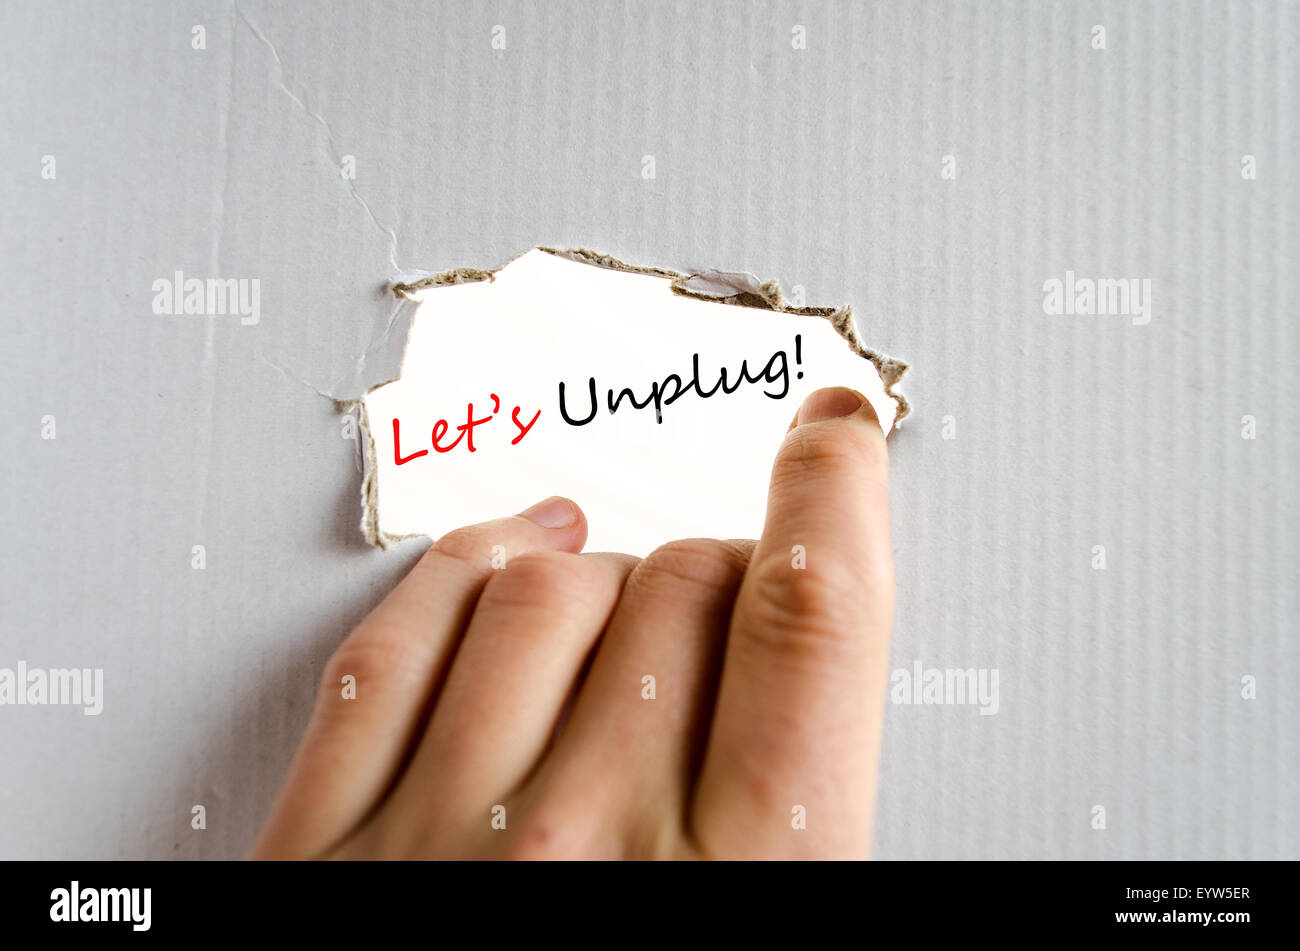 Let's unplug text concept isolated over white background Stock Photo